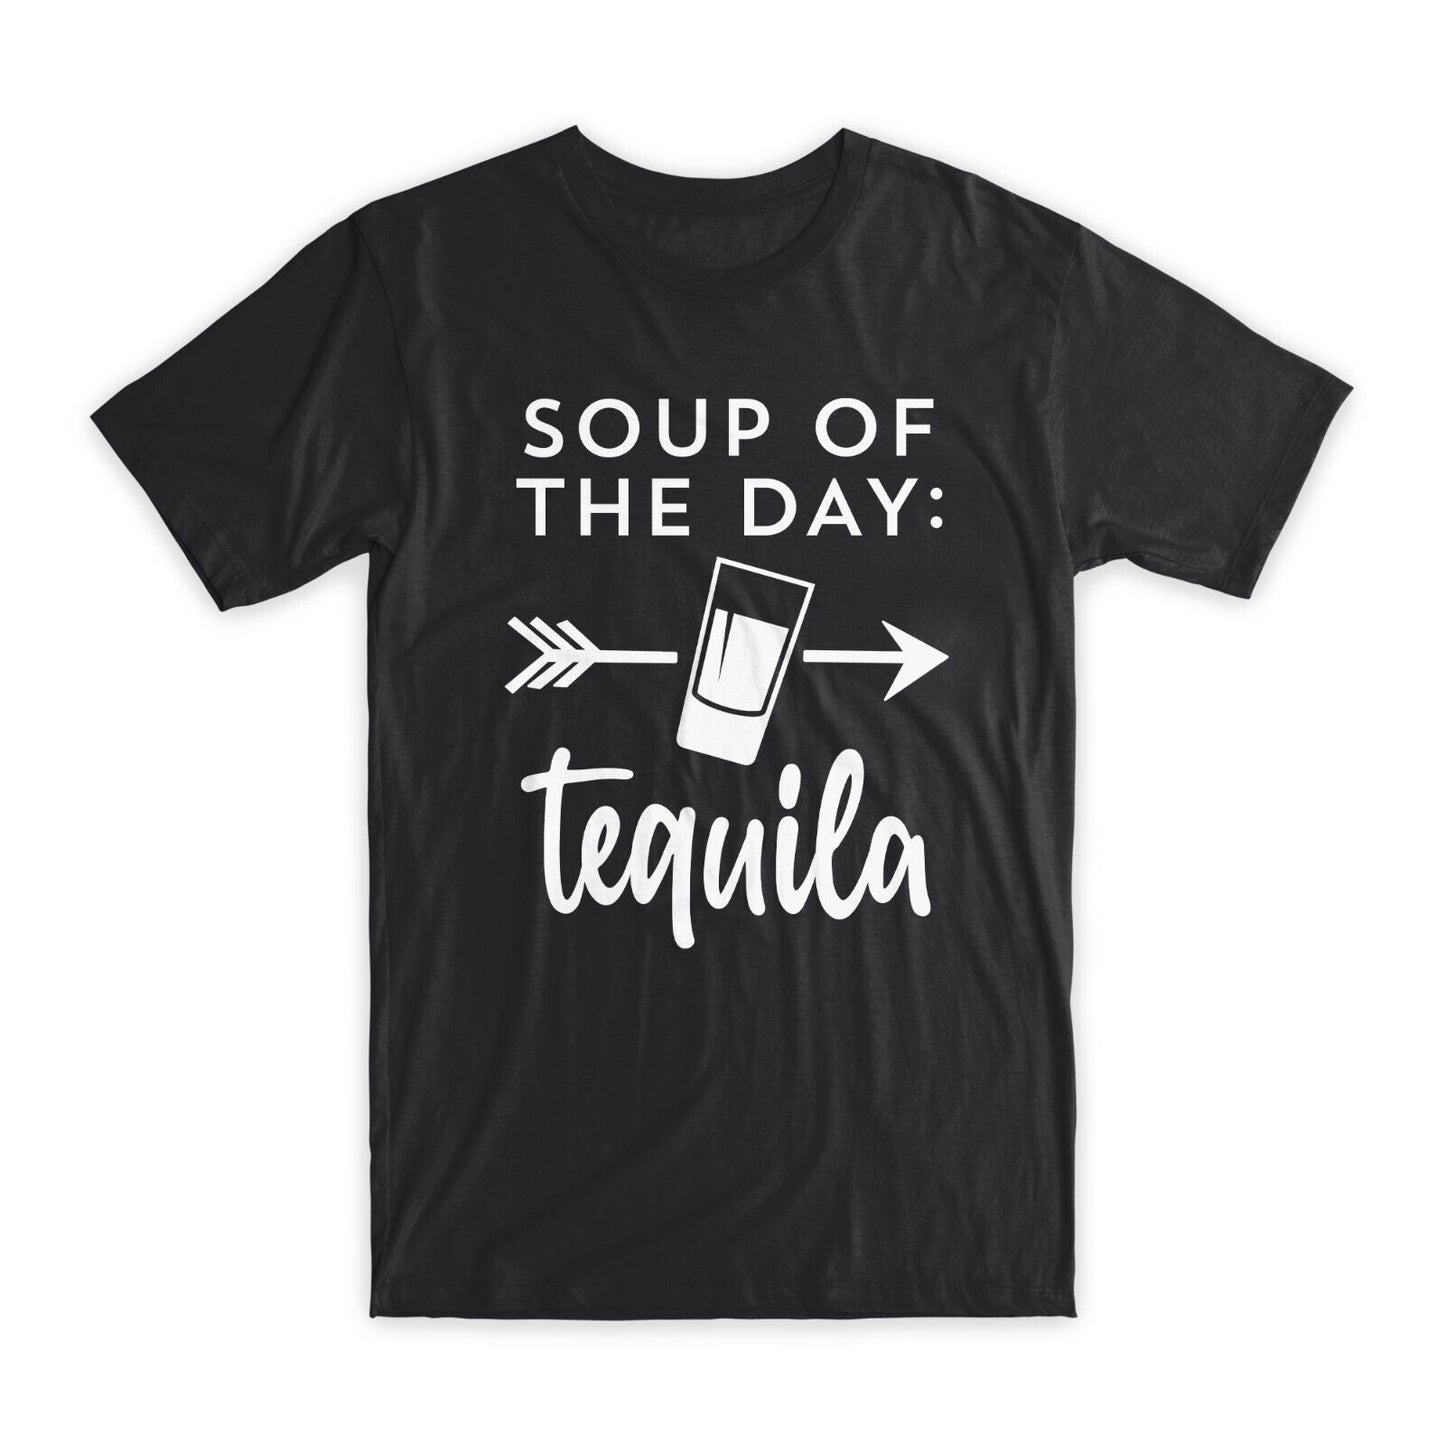 Soup of The Day Tequila T-Shirt Premium Soft Cotton Crew Neck Funny Tee Gift NEW